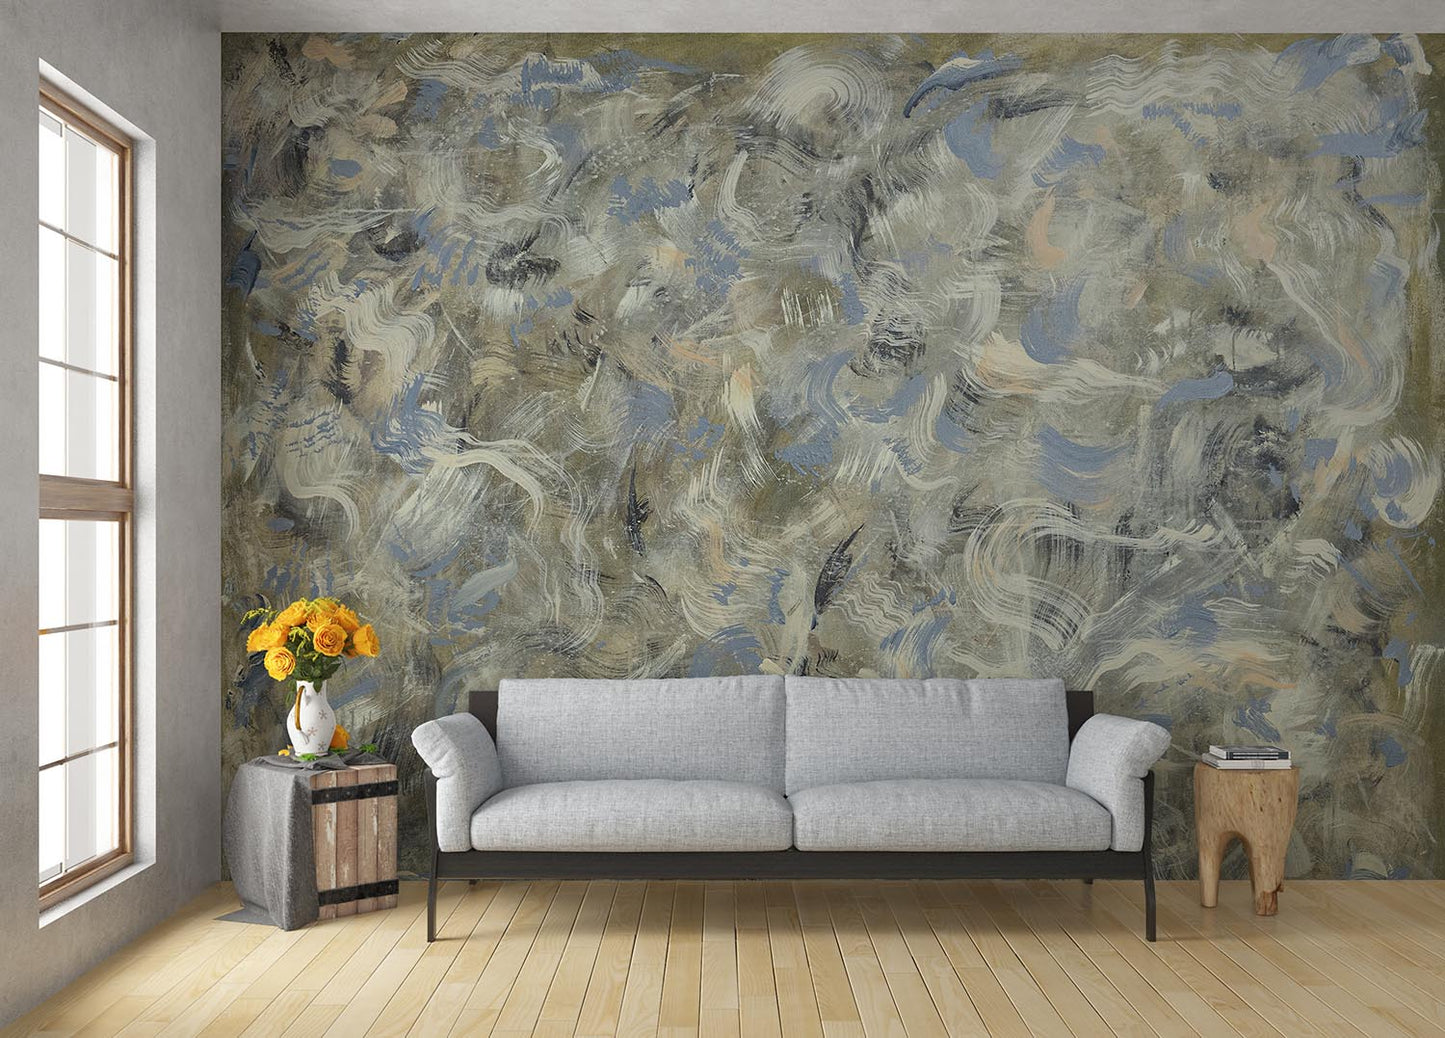 Sand Bridge abstract art by Doug LaRue as a mural on a living room wall